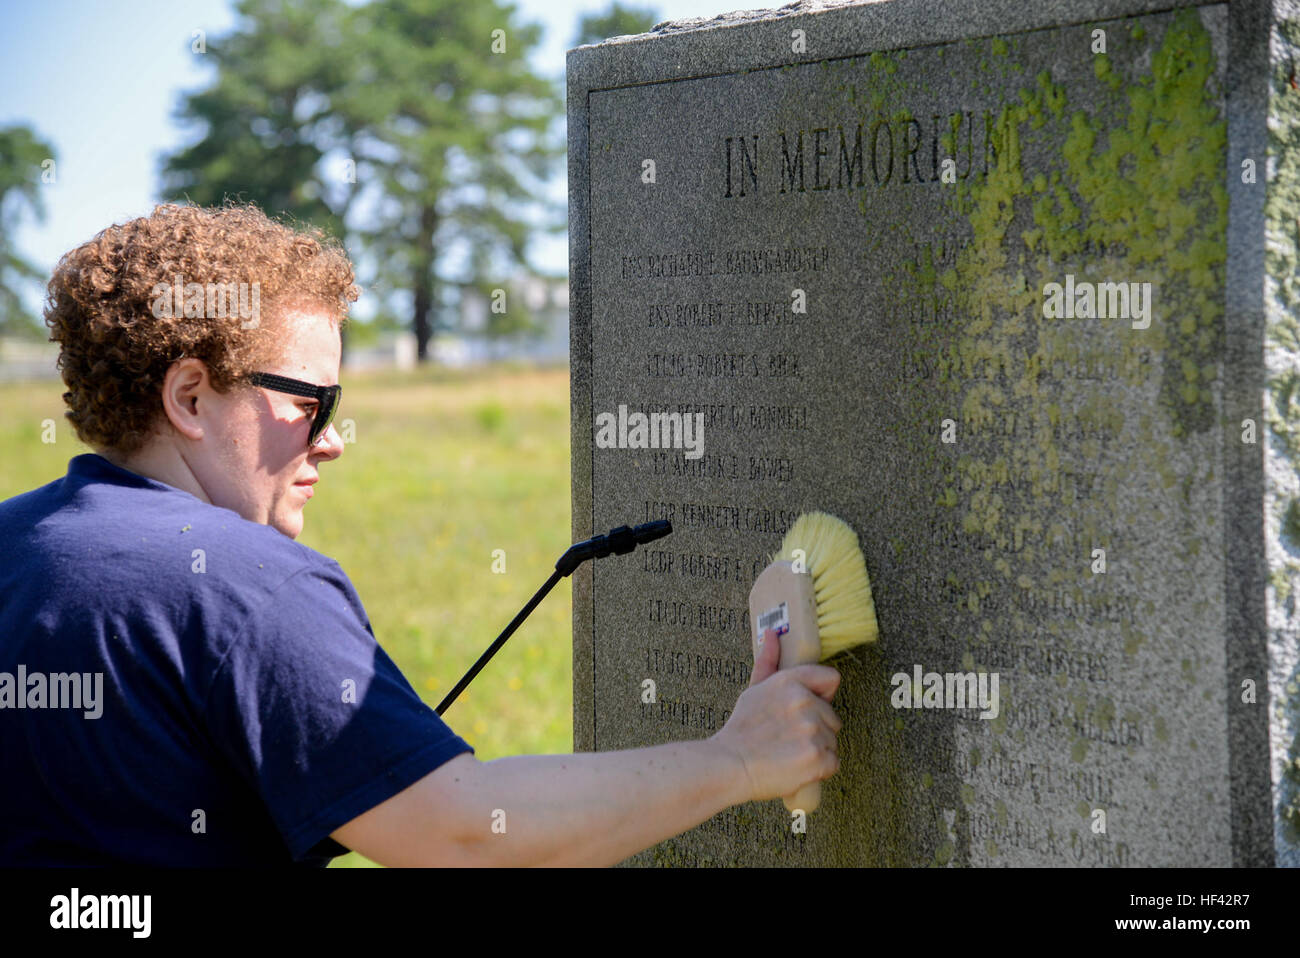 Melissa Swanson, Naval History and Heritage Command Conservator, uses a scrub brush to remove lichens growing on a U.S. Navy VC-4 memorial marker, located near the main gate of the 177th Fighter Wing of the New Jersey Air National Guard in Egg Harbor Township, N.J., on July 20, 2016. The monument, erected in May 1994 by the Association of The Composite Squadron Four Nightcappers, pays tribute to the members of the VC-4 Squadron based at Naval Air Station Atlantic City from September 1948 to May 1958 who gave the ultimate sacrifice. Swanson, based out of Richmond, Virginia, earned an undergradu Stock Photo